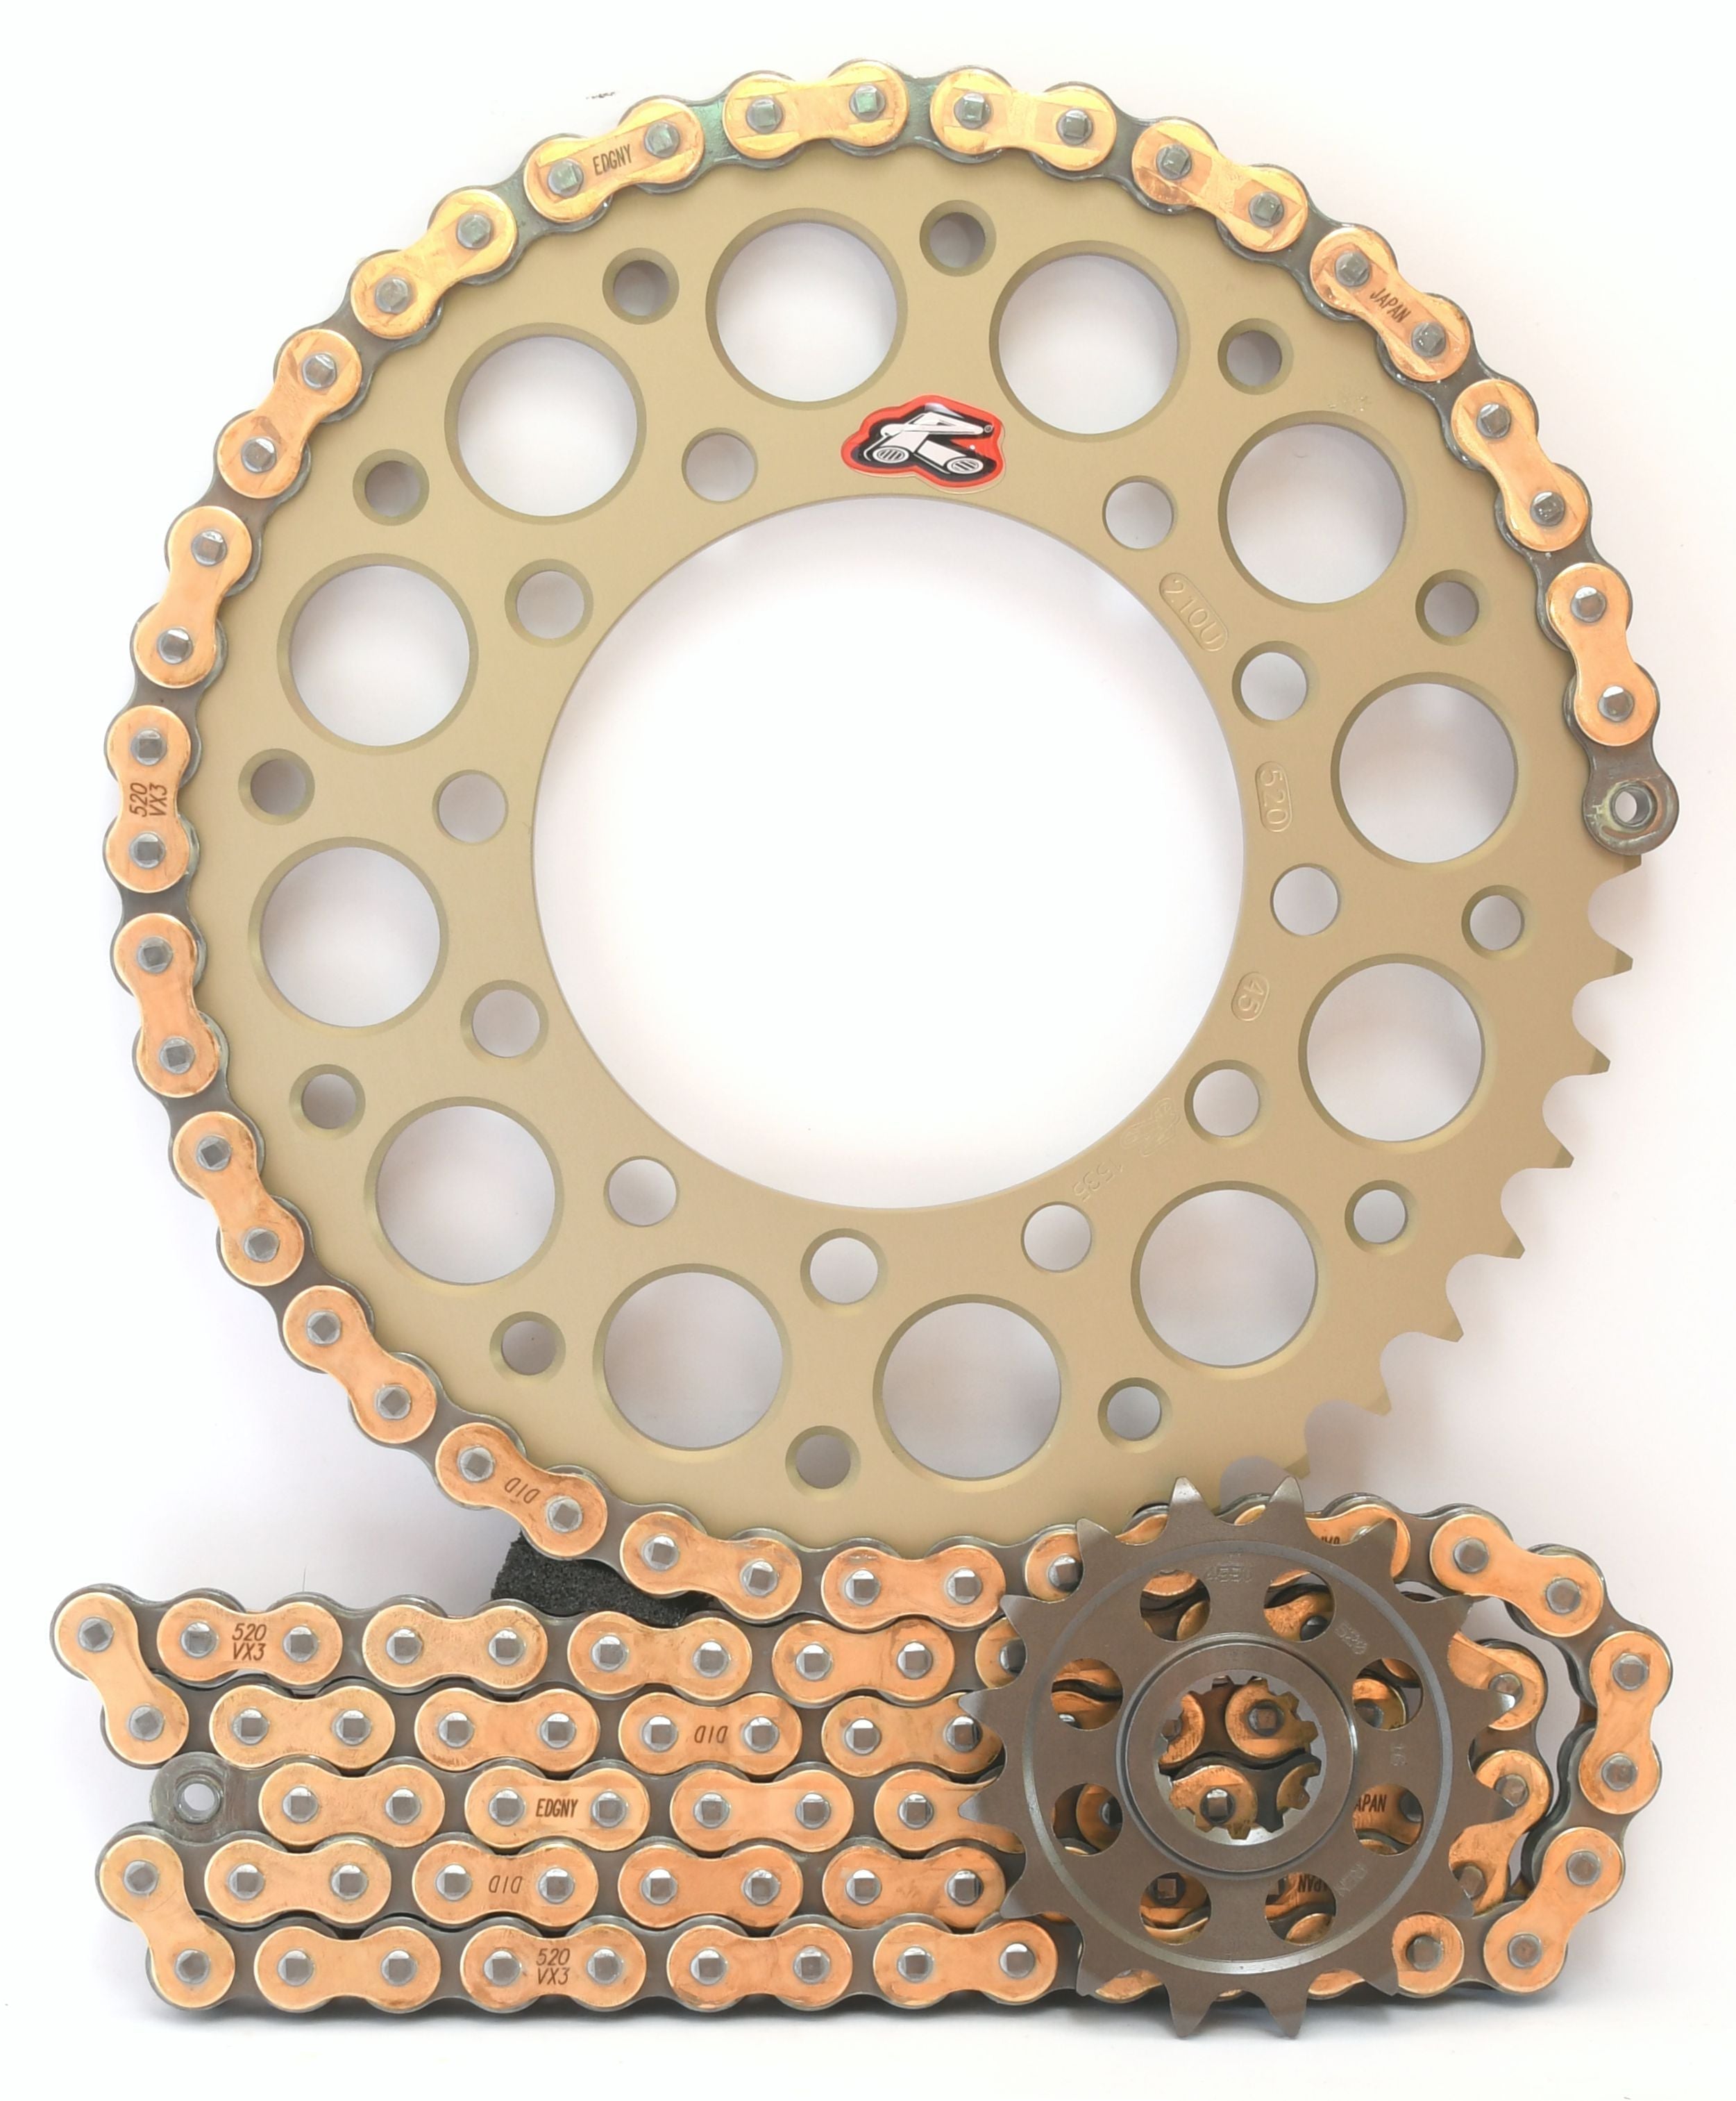 Renthal Ultralight and DID Chain & Sprocket Kit 520 Conversion for Triumph Daytona 2013-2017 - Standard Gearing